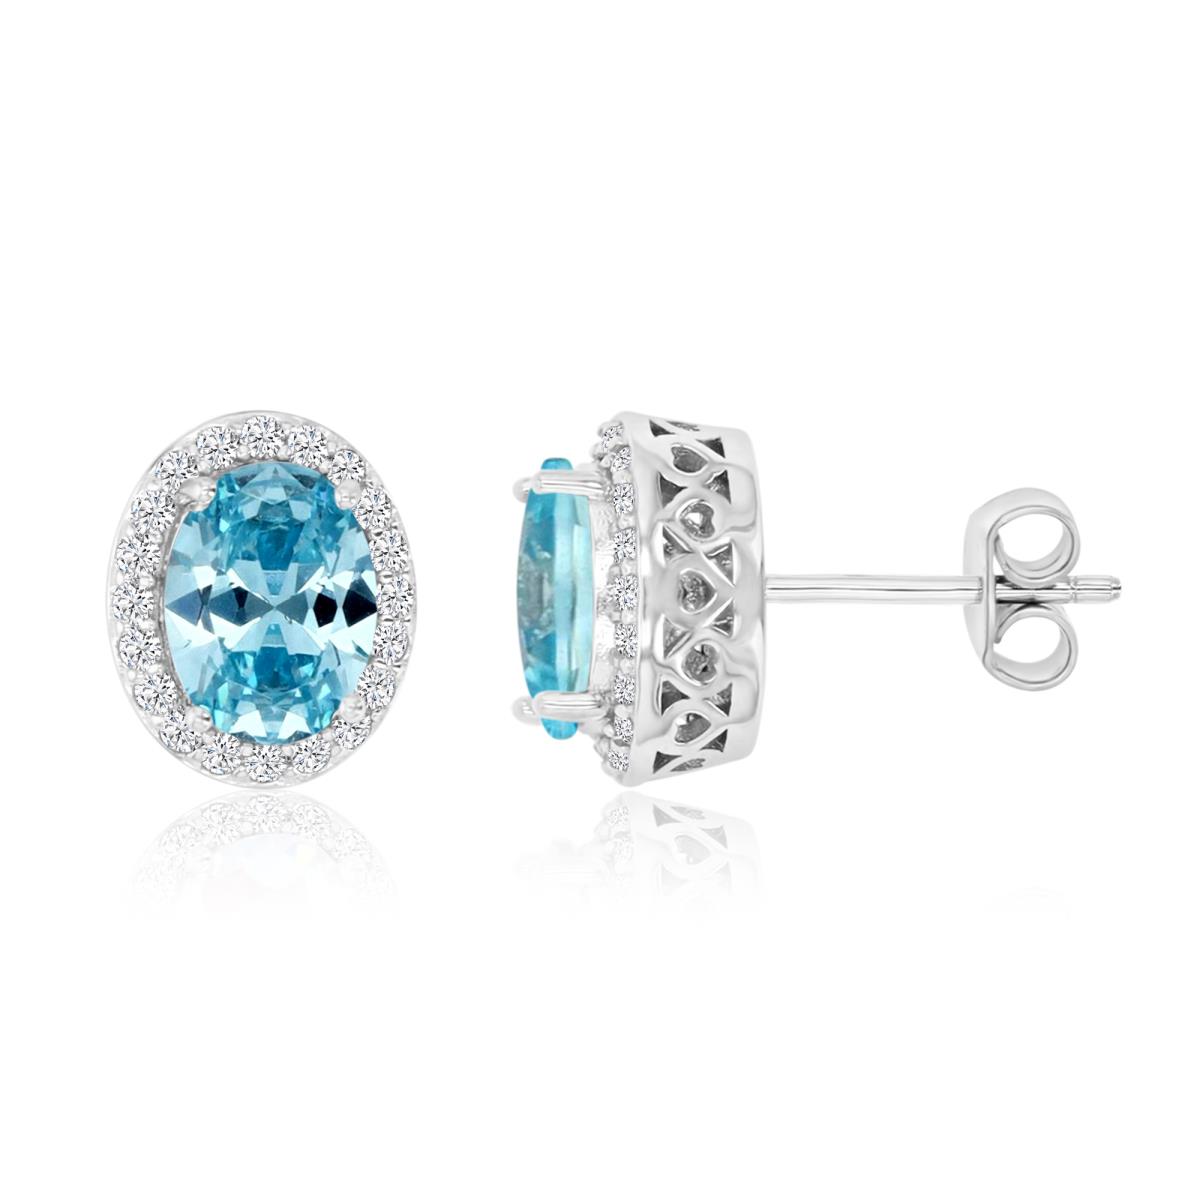 Sterling Silver 8x6mm Oval Pave Light Blue & White CZ Stud Earring